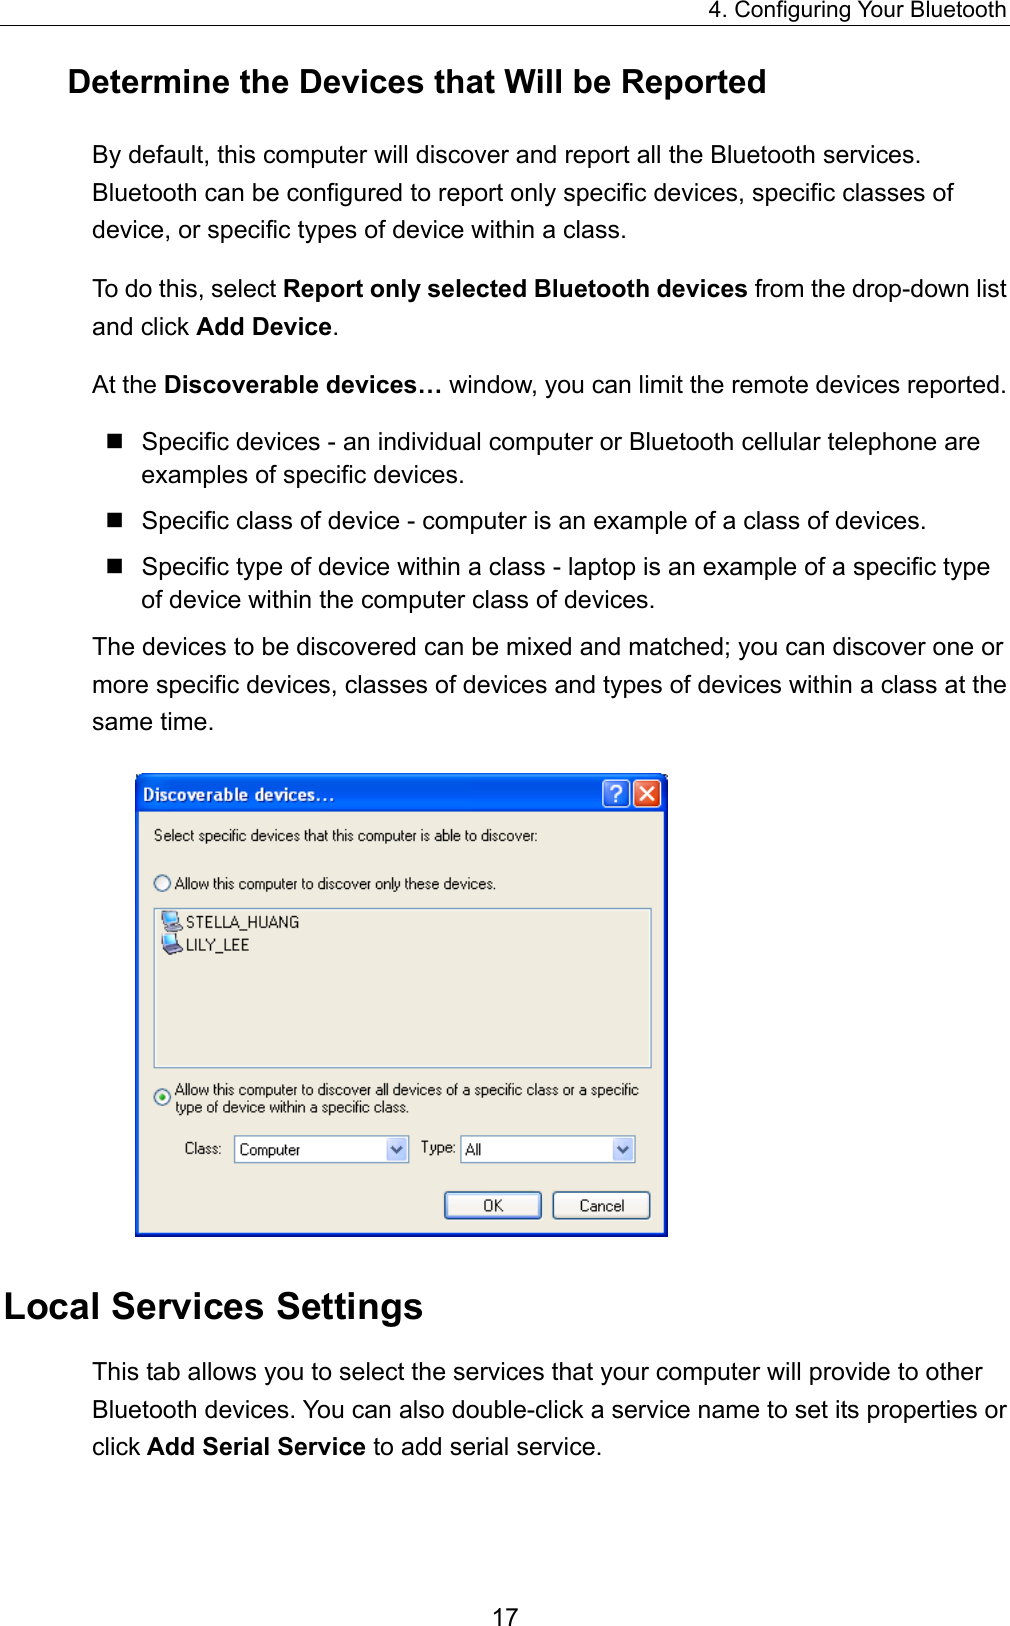 4. Configuring Your Bluetooth 17 Determine the Devices that Will be Reported By default, this computer will discover and report all the Bluetooth services. Bluetooth can be configured to report only specific devices, specific classes of device, or specific types of device within a class.   To do this, select Report only selected Bluetooth devices from the drop-down list and click Add Device.  At the Discoverable devices… window, you can limit the remote devices reported.  Specific devices - an individual computer or Bluetooth cellular telephone are examples of specific devices.  Specific class of device - computer is an example of a class of devices.  Specific type of device within a class - laptop is an example of a specific type of device within the computer class of devices. The devices to be discovered can be mixed and matched; you can discover one or more specific devices, classes of devices and types of devices within a class at the same time.  Local Services Settings This tab allows you to select the services that your computer will provide to other Bluetooth devices. You can also double-click a service name to set its properties or click Add Serial Service to add serial service.   